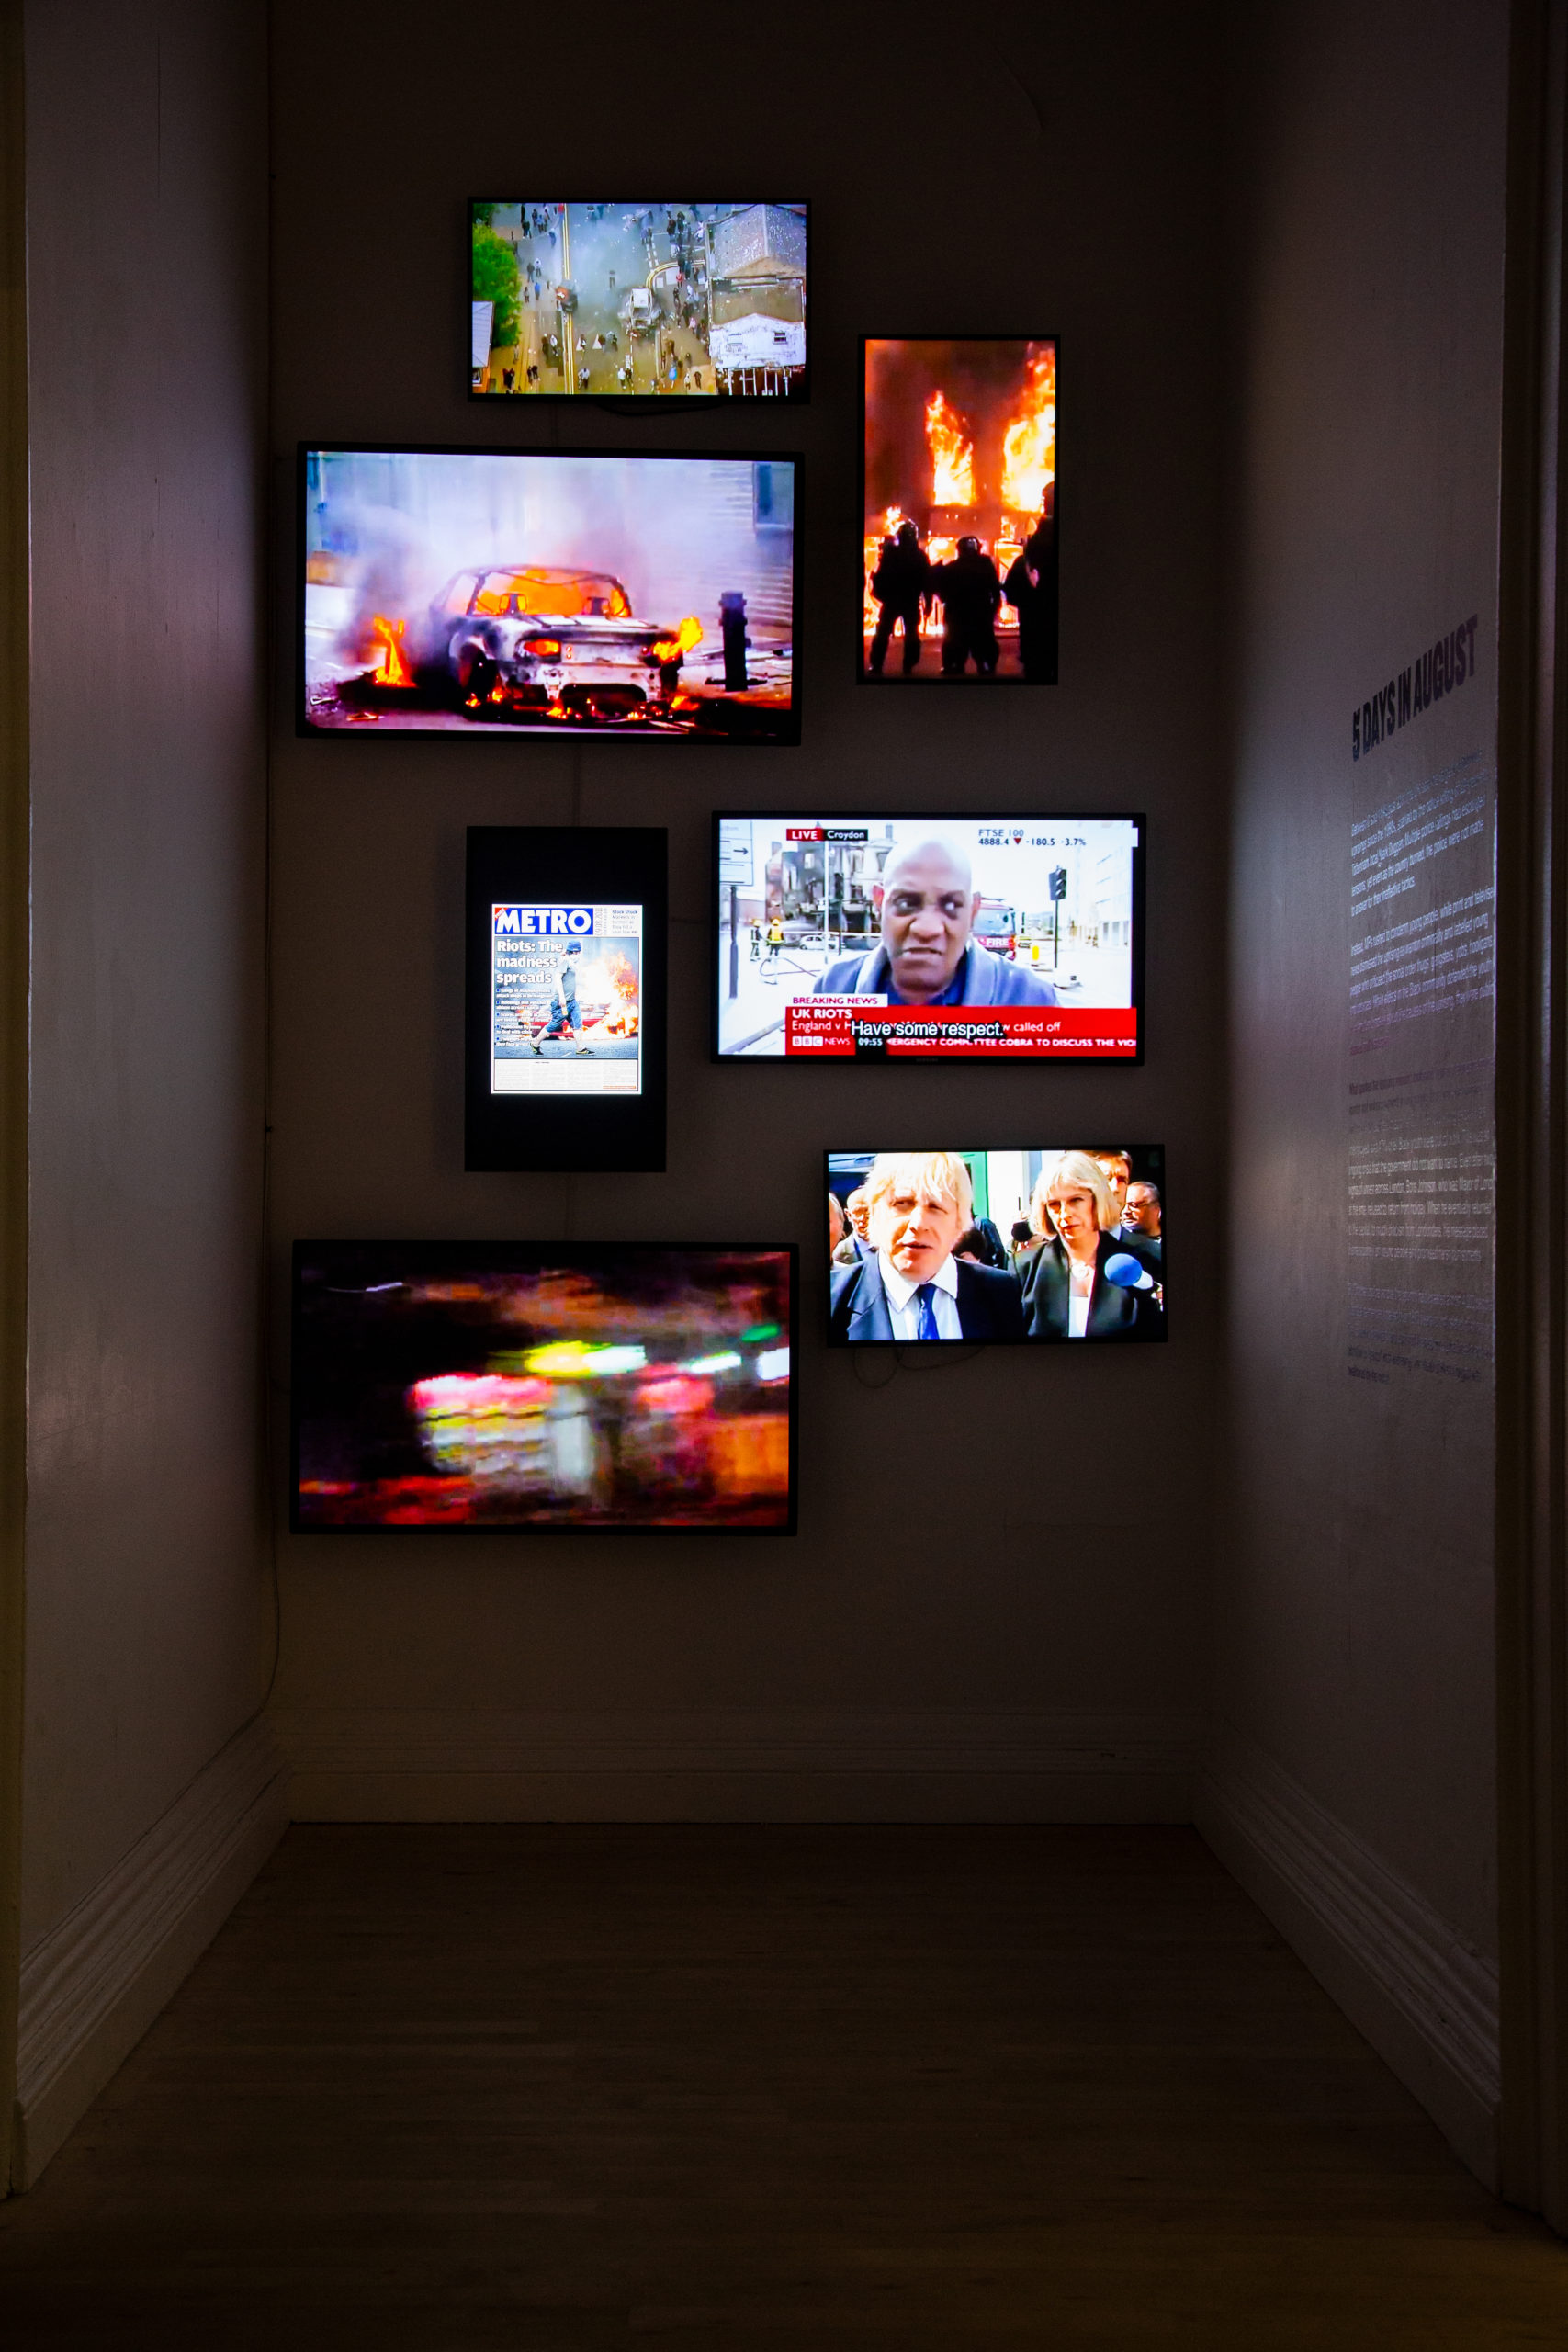 A dark room with 7 screens, displaying images of protests and news videos, mounted on the wall.